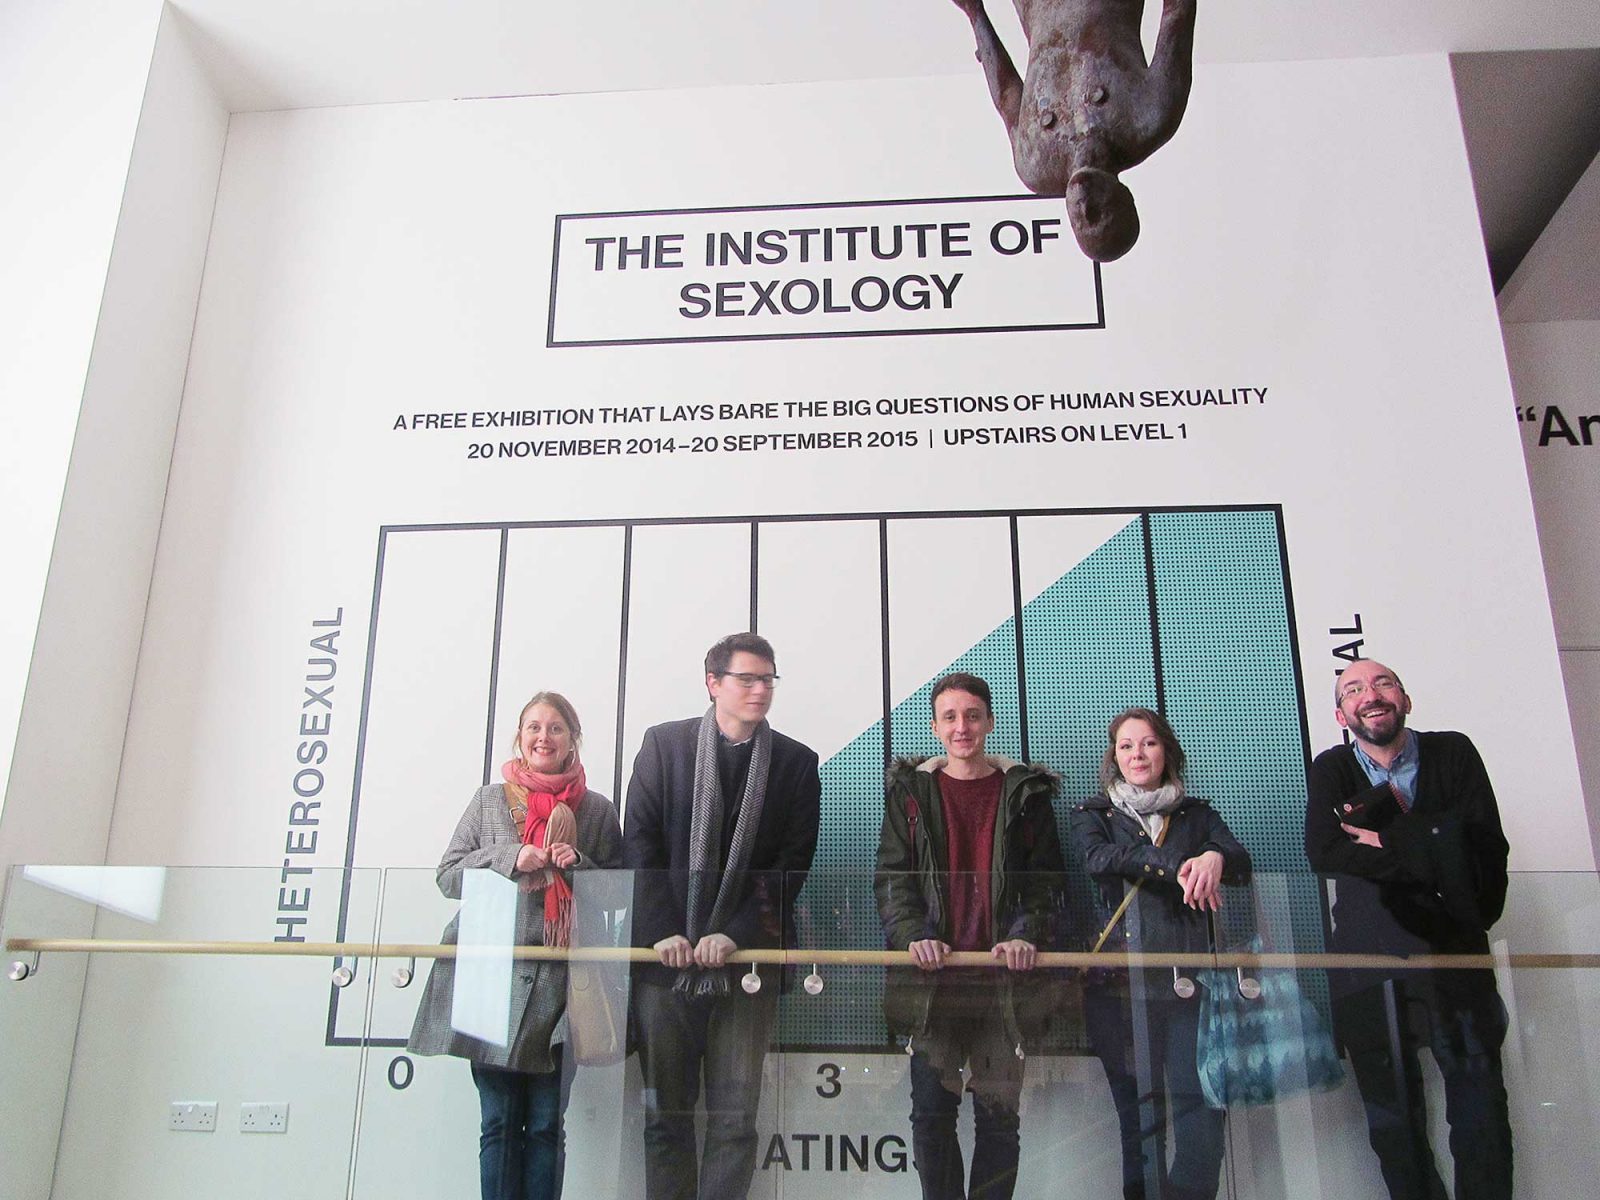 The Institute of Sexology at Wellcome Collection